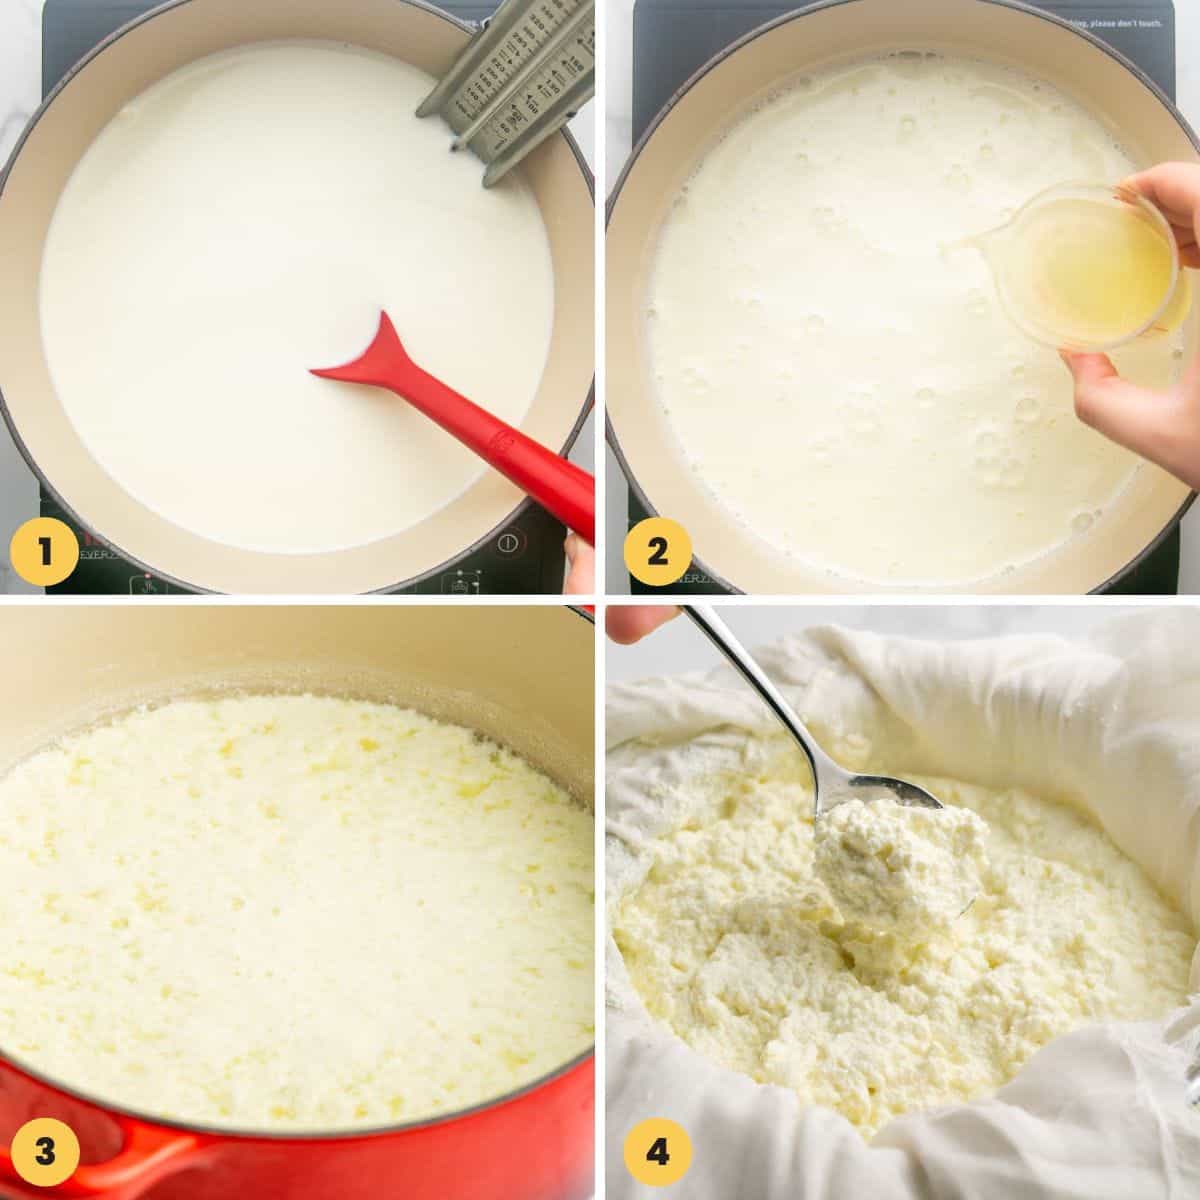 a collage of 4 images showing how to make ricotta cheese from scratch.